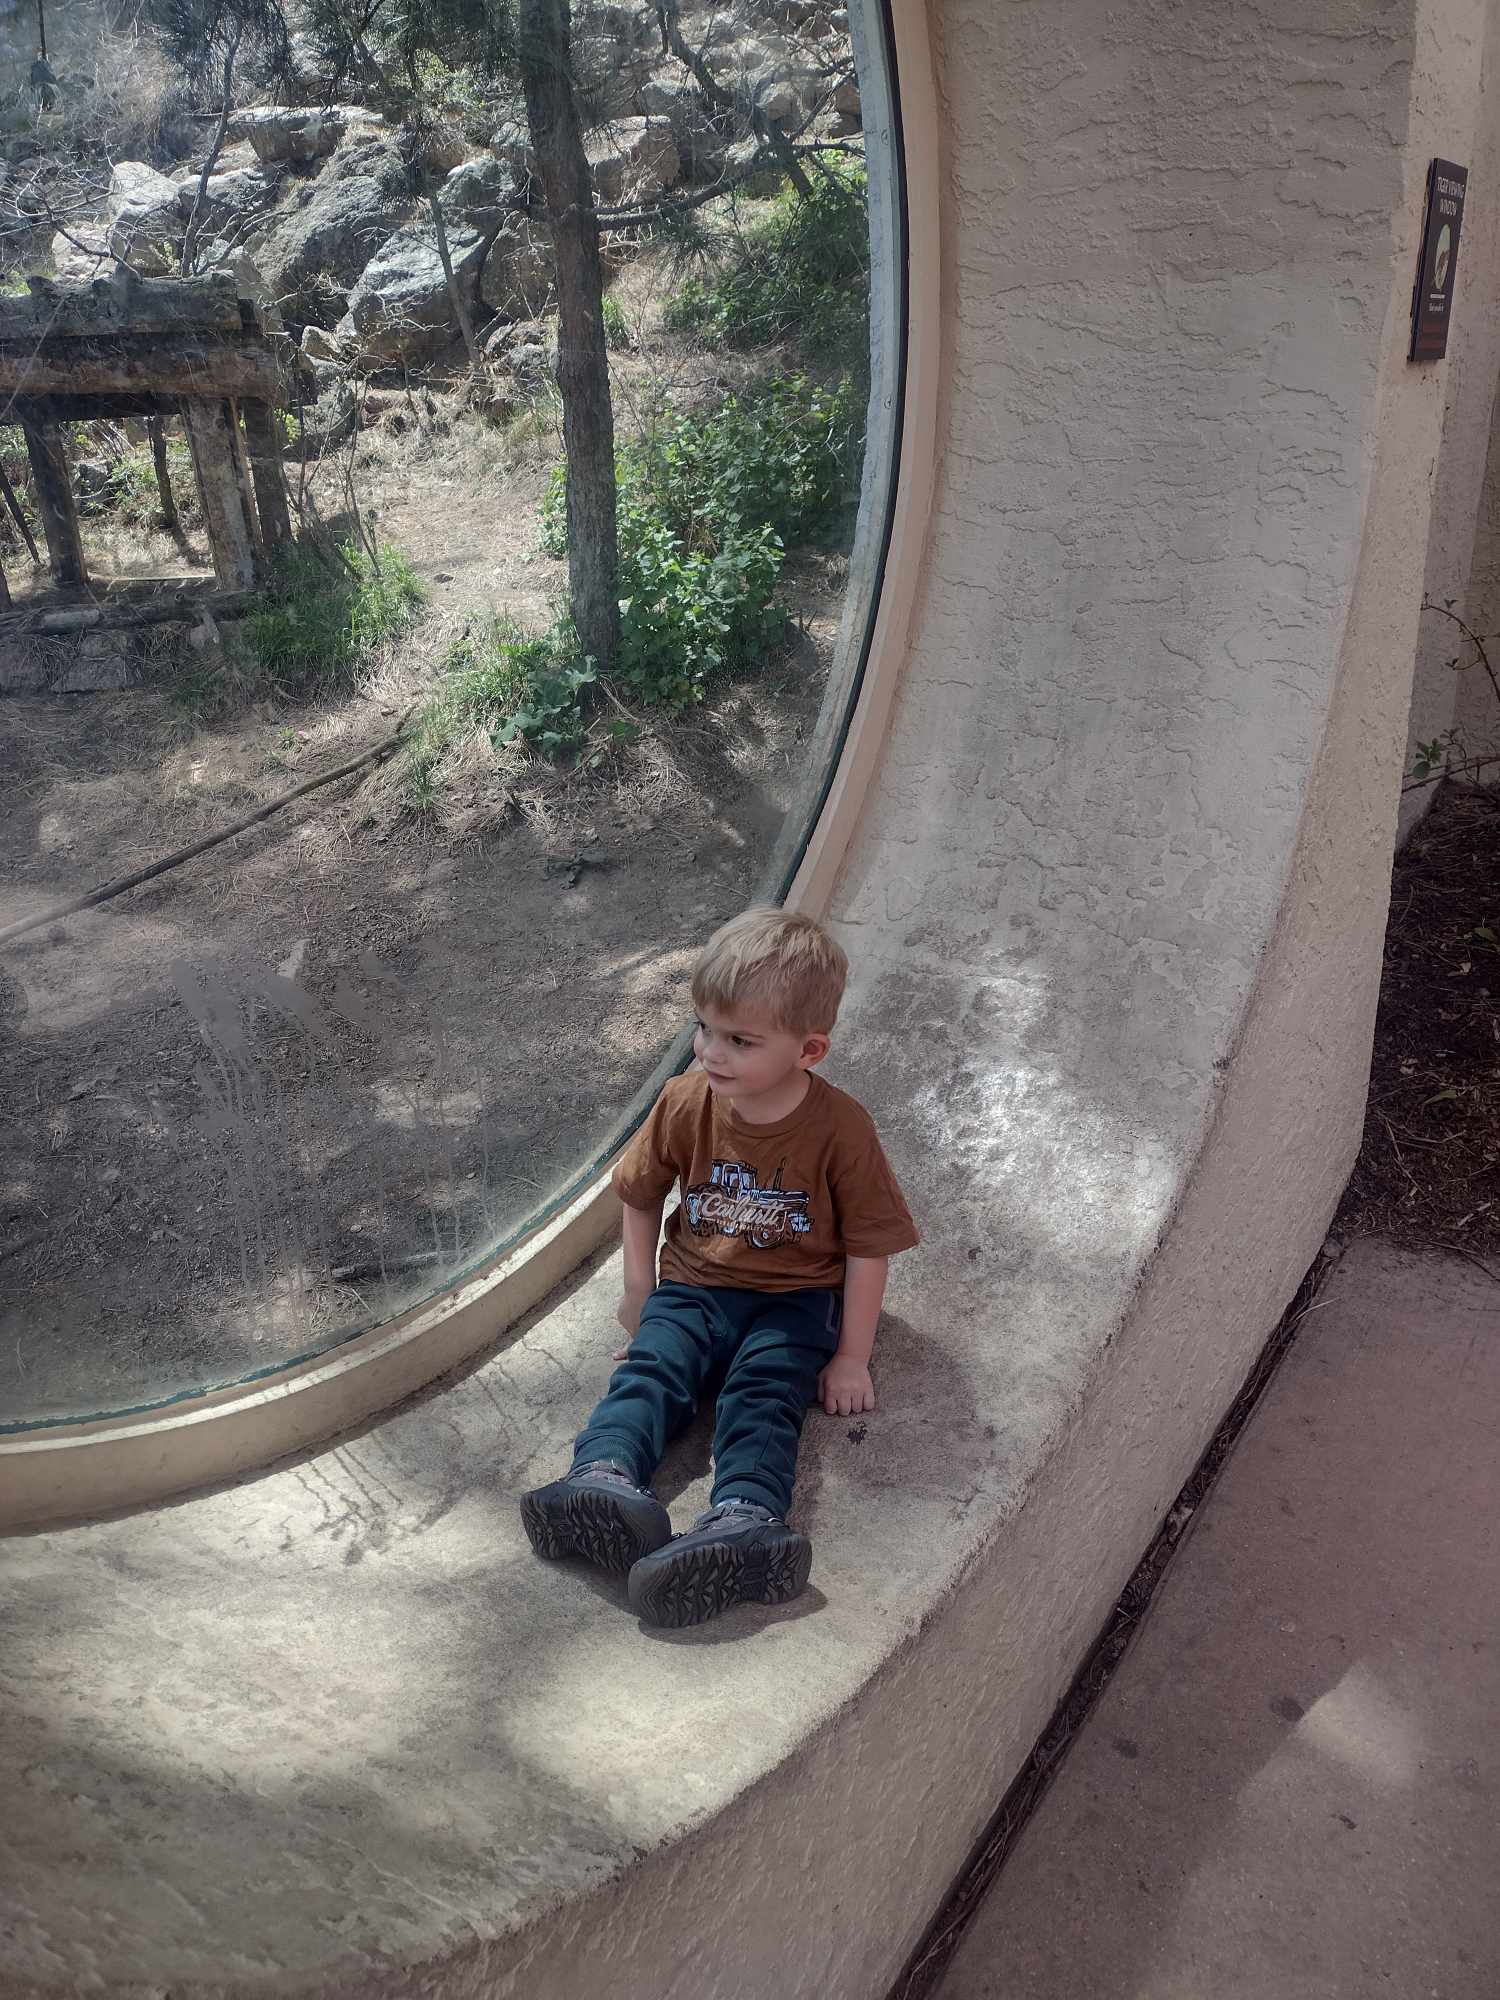 toddler sits in a large cylindrical window, looking towards a rocky, zoo-like enclosure at a zoo or wildlife exhibit